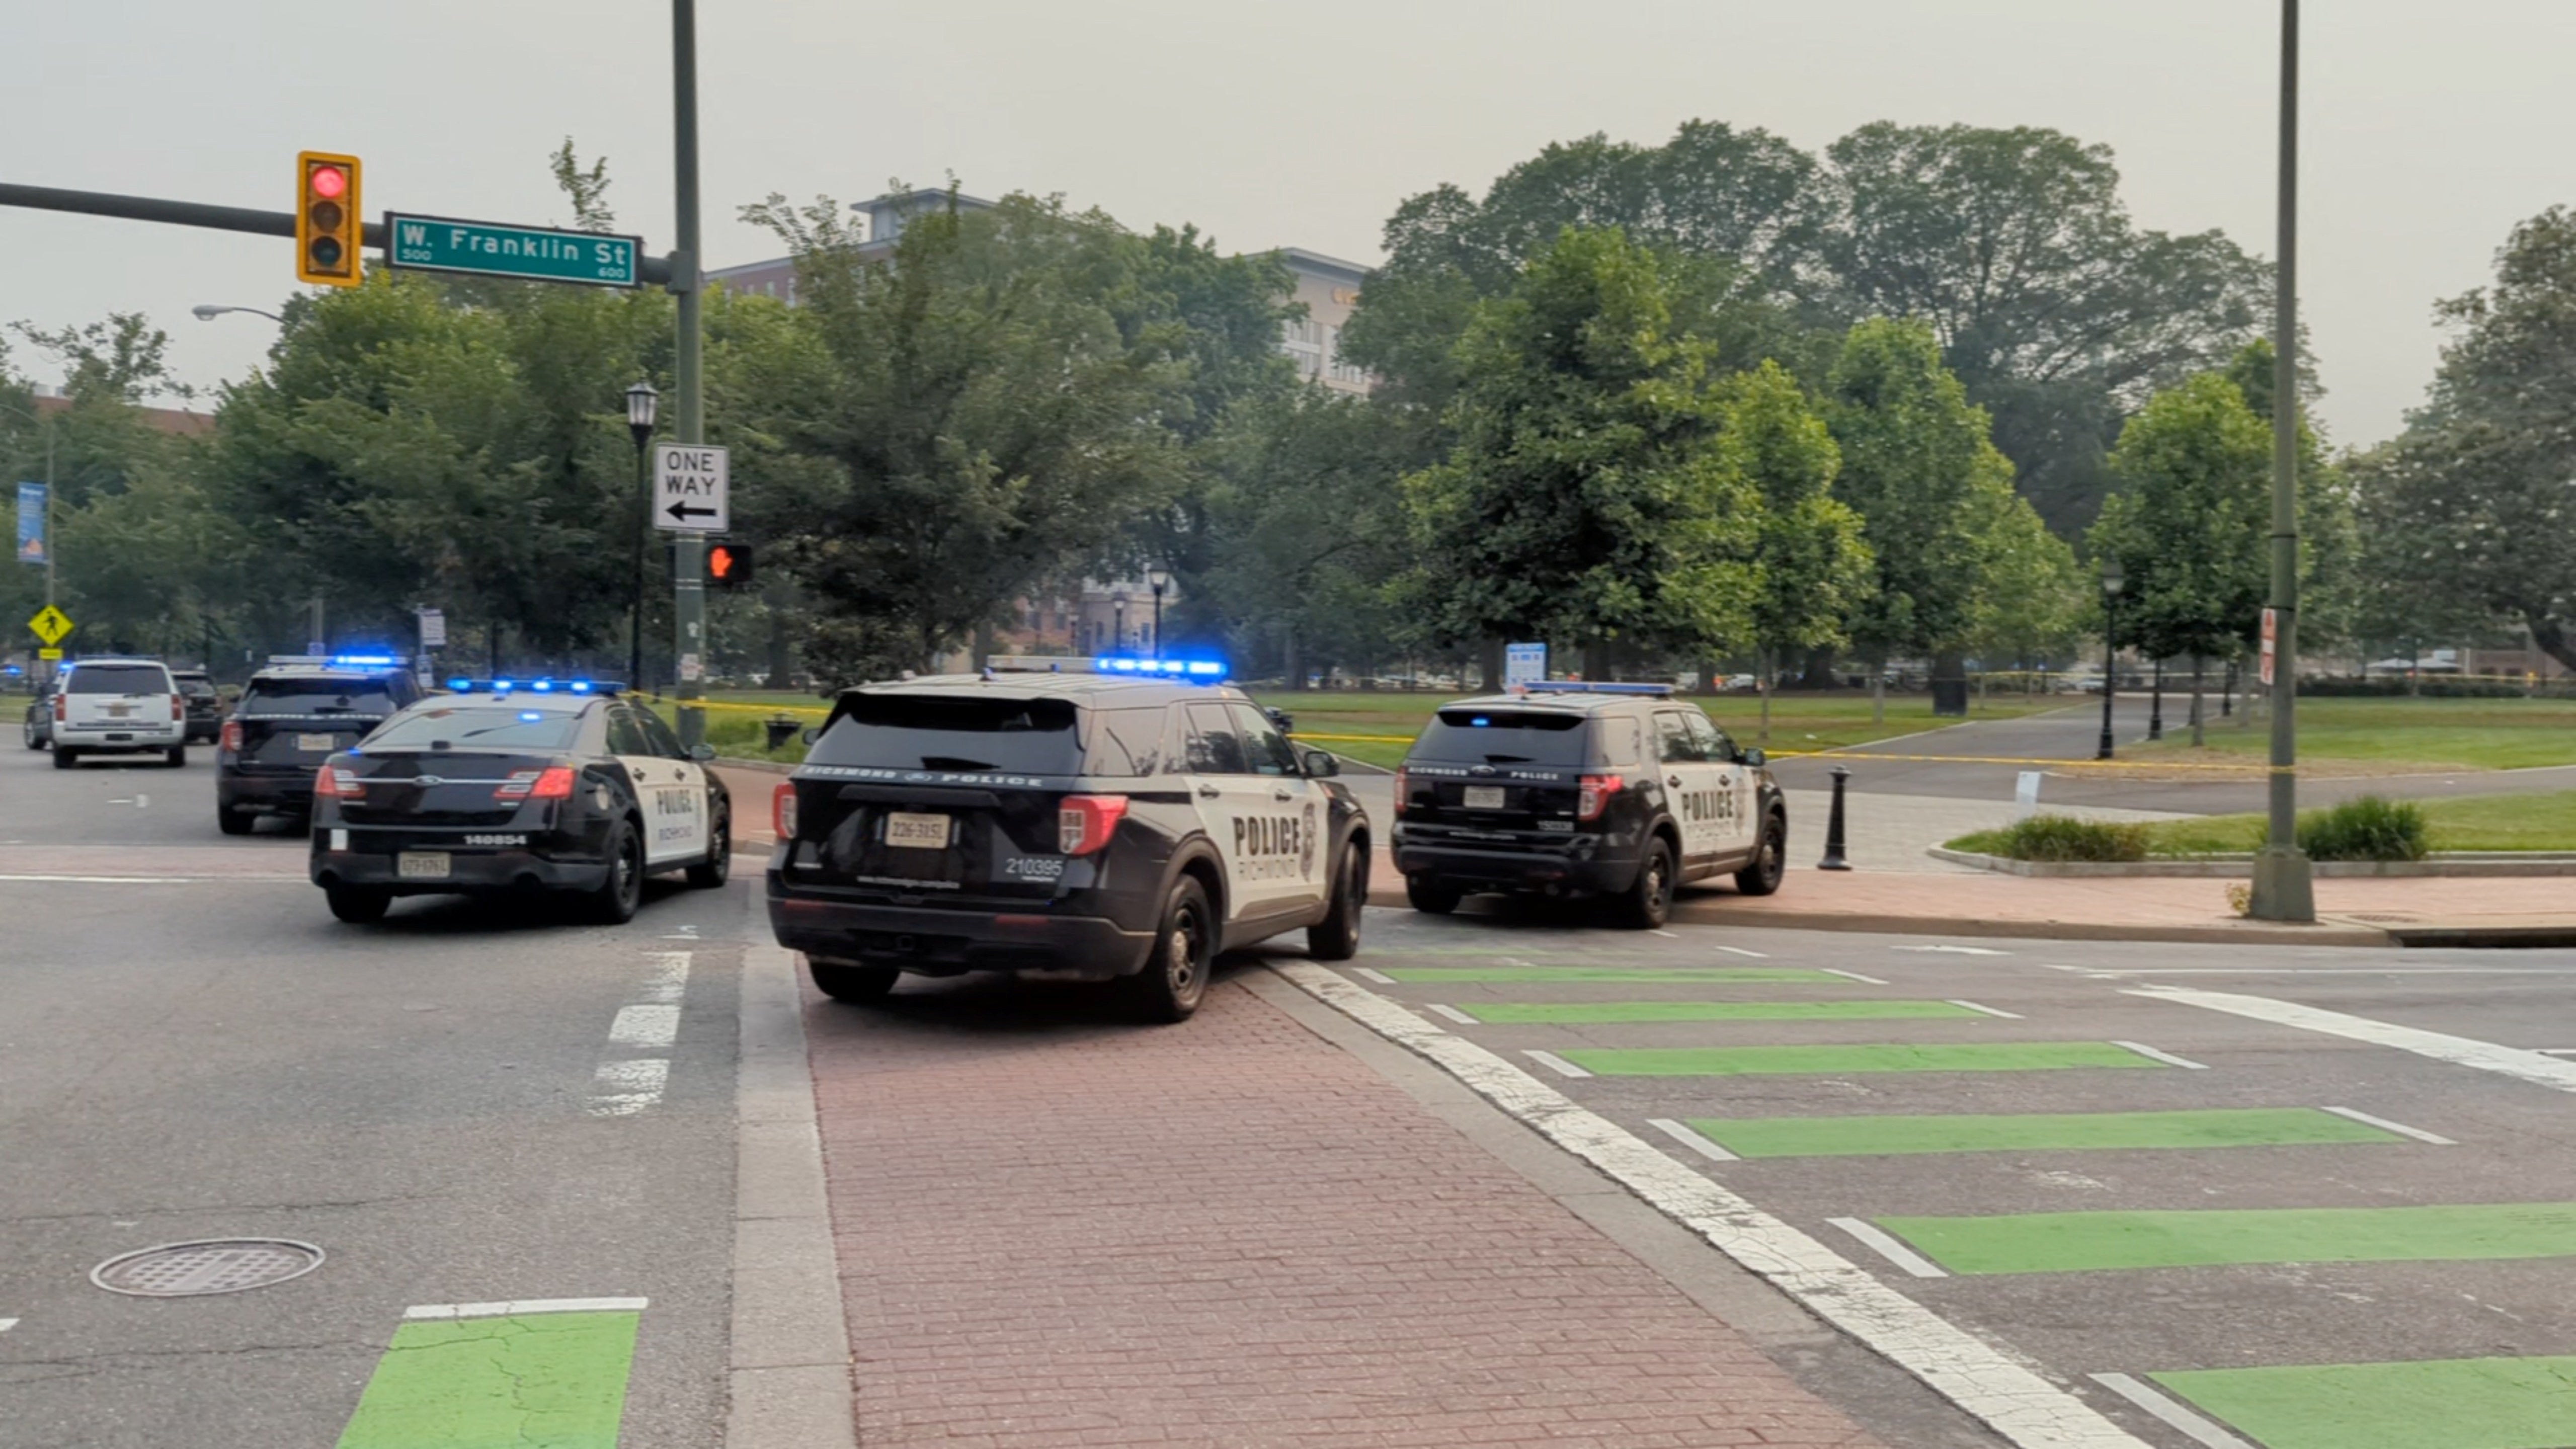 Police vehicles are seen parked near a park where, according to the police, a gunman opened fire, in Richmond, Virginia